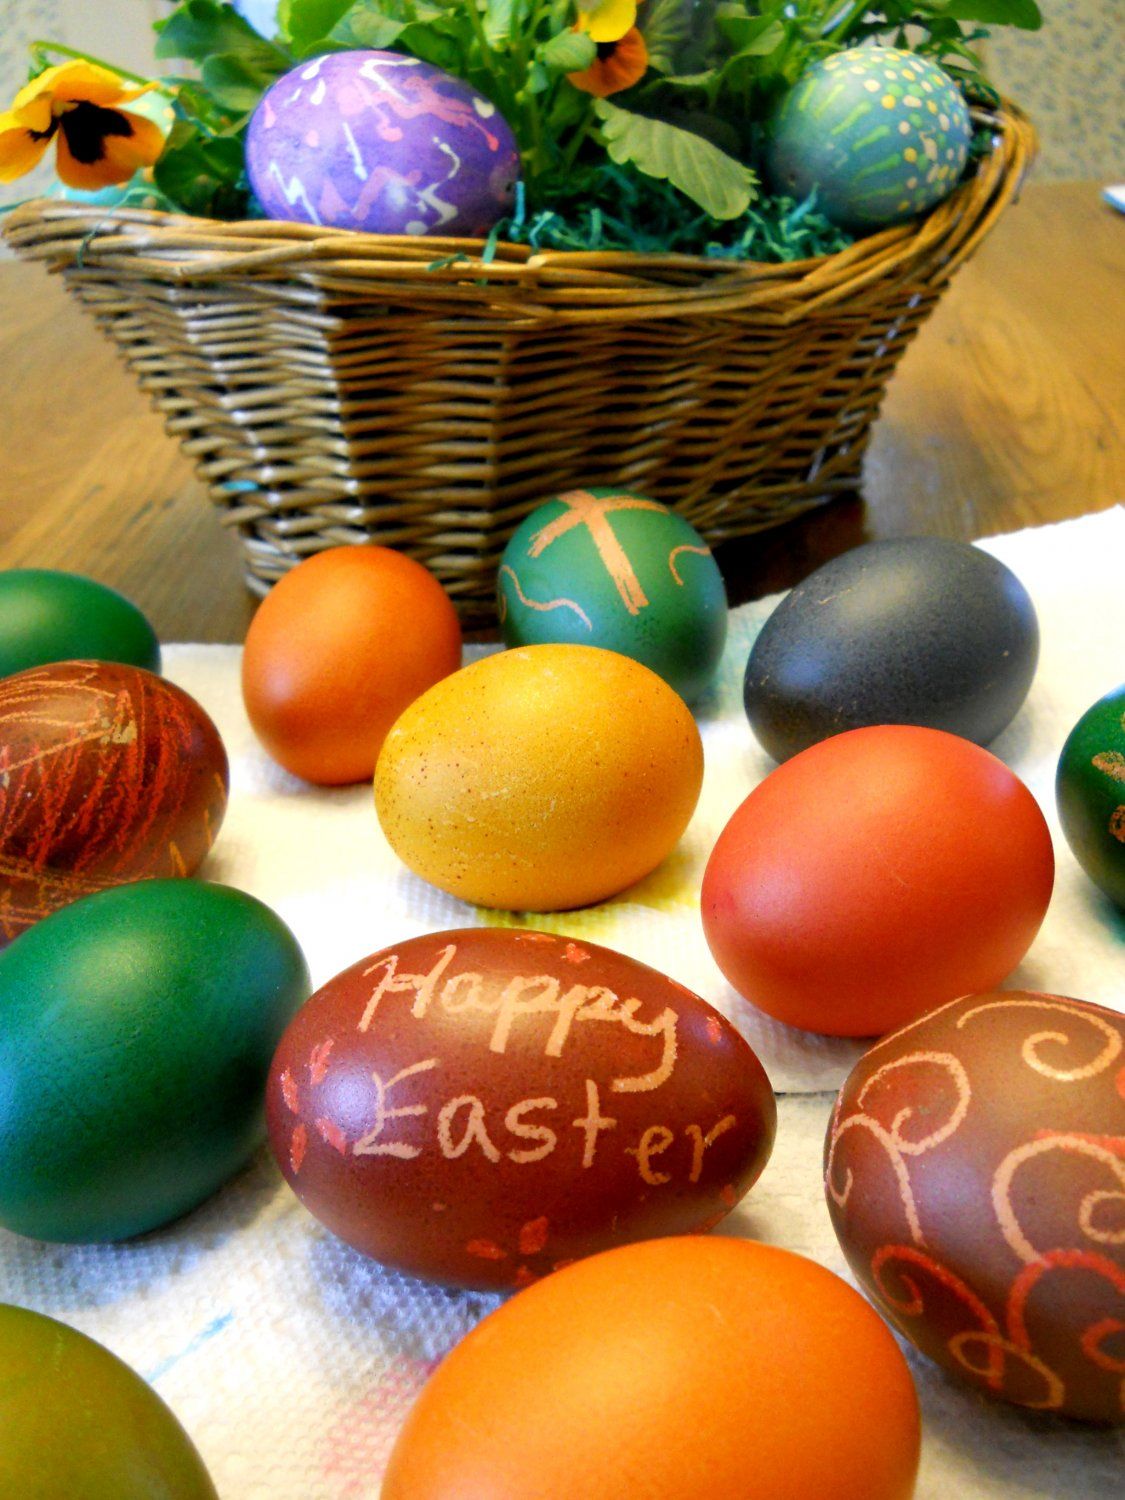 Previous Happening: Spring, Easter, and Eggs